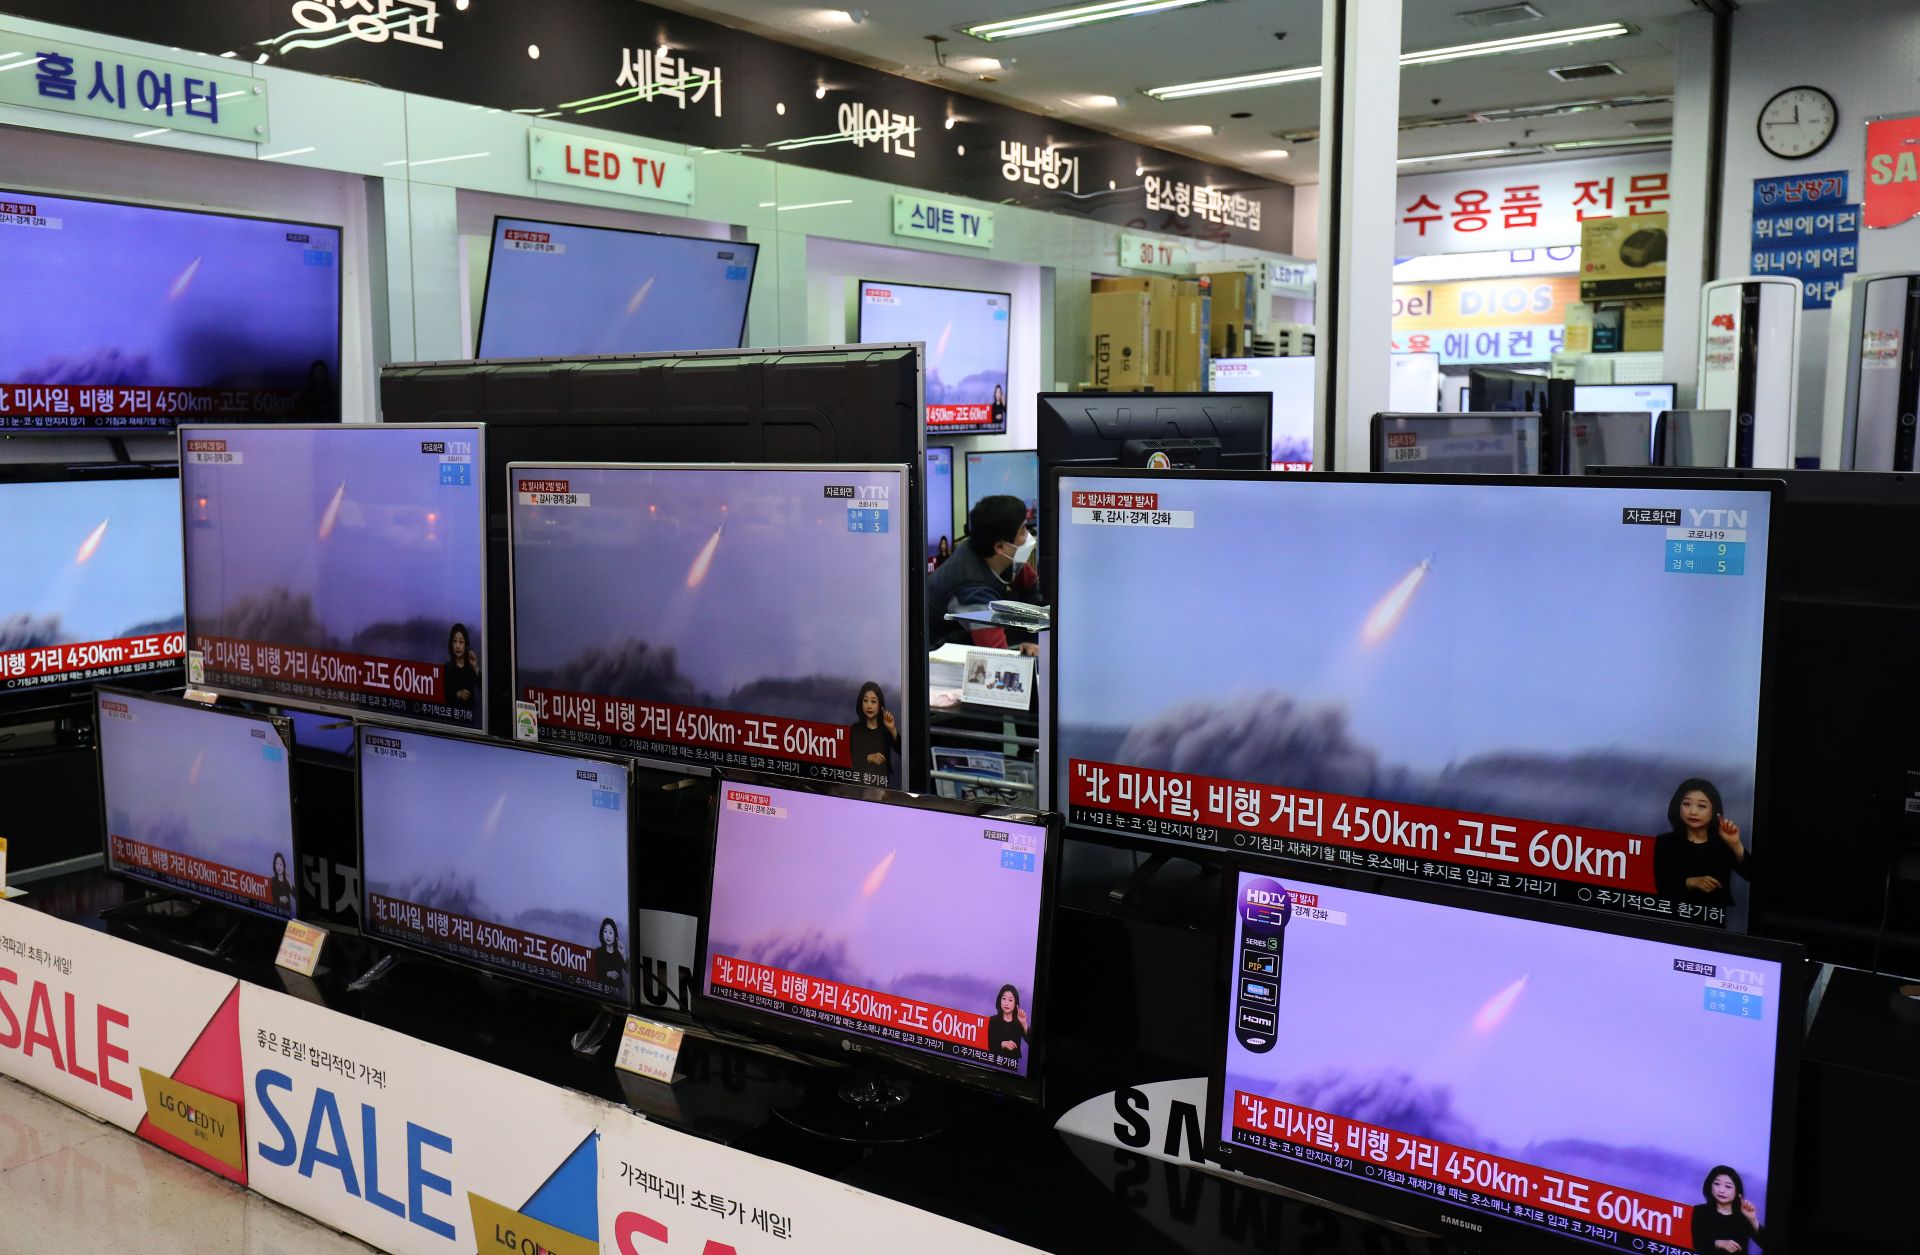 TV screens show the launch of North Korean missiles on March 25, 2021, in Seoul, South Korea. 